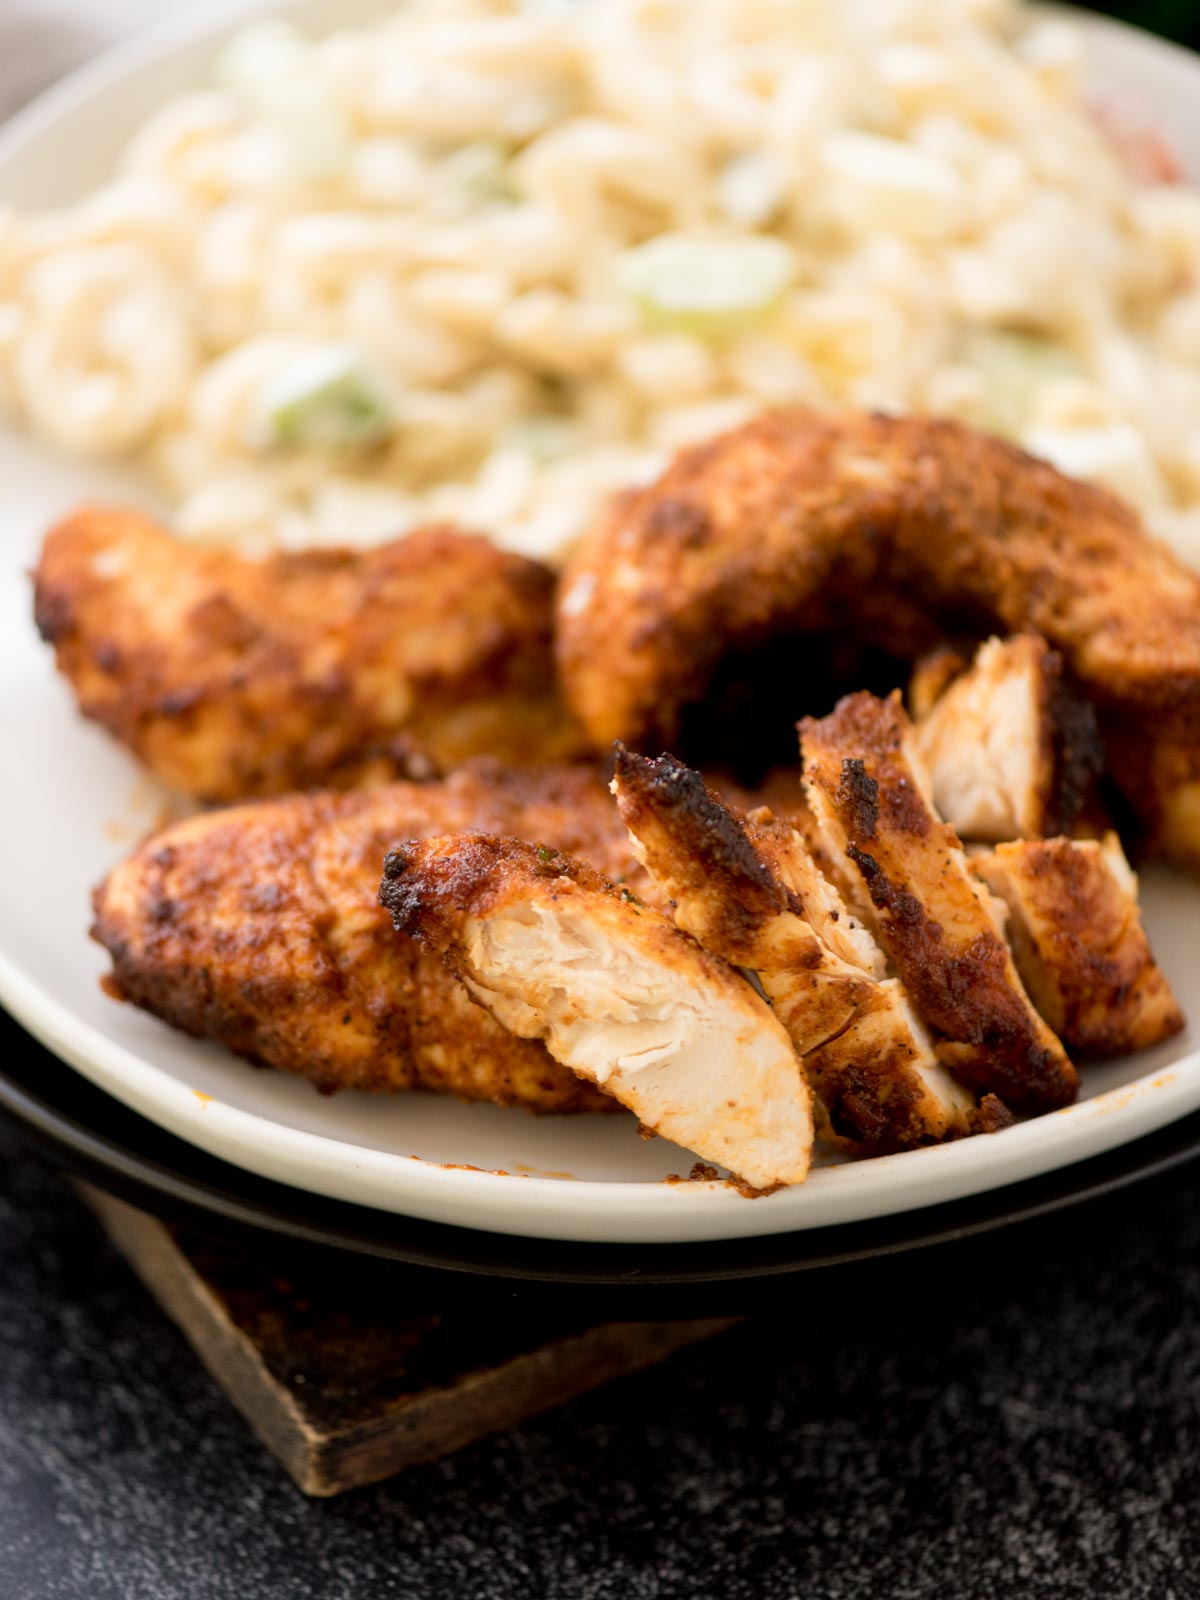 air fried chicken tenderloins on a plate with macaroni salad. Some of them are whole and some are sliced.